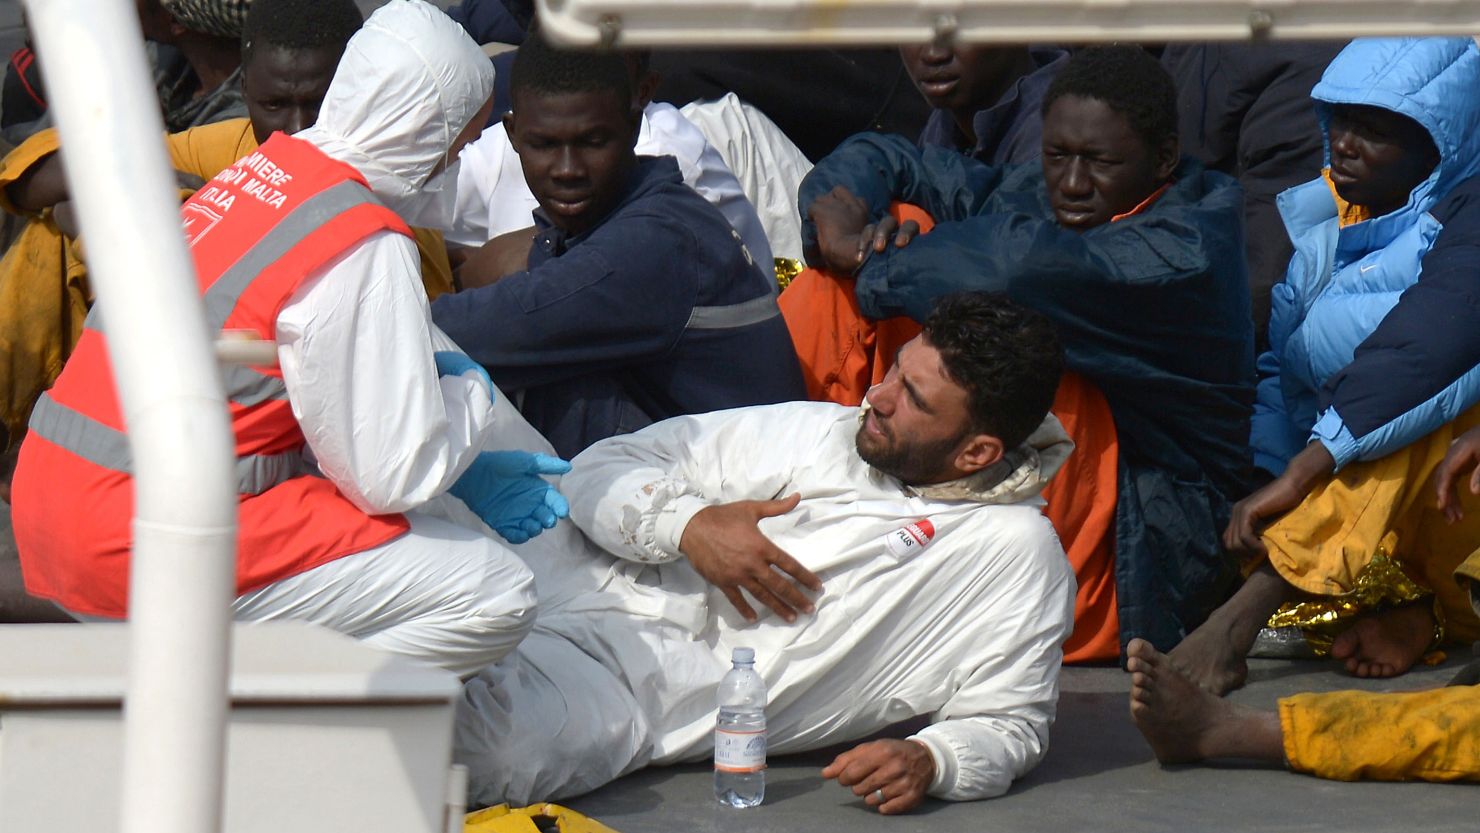 Rescued migrants talk to a member of the Malta Order after a fishing boat carrying migrants capsized off the Libyan coast on April 20, 2015. 